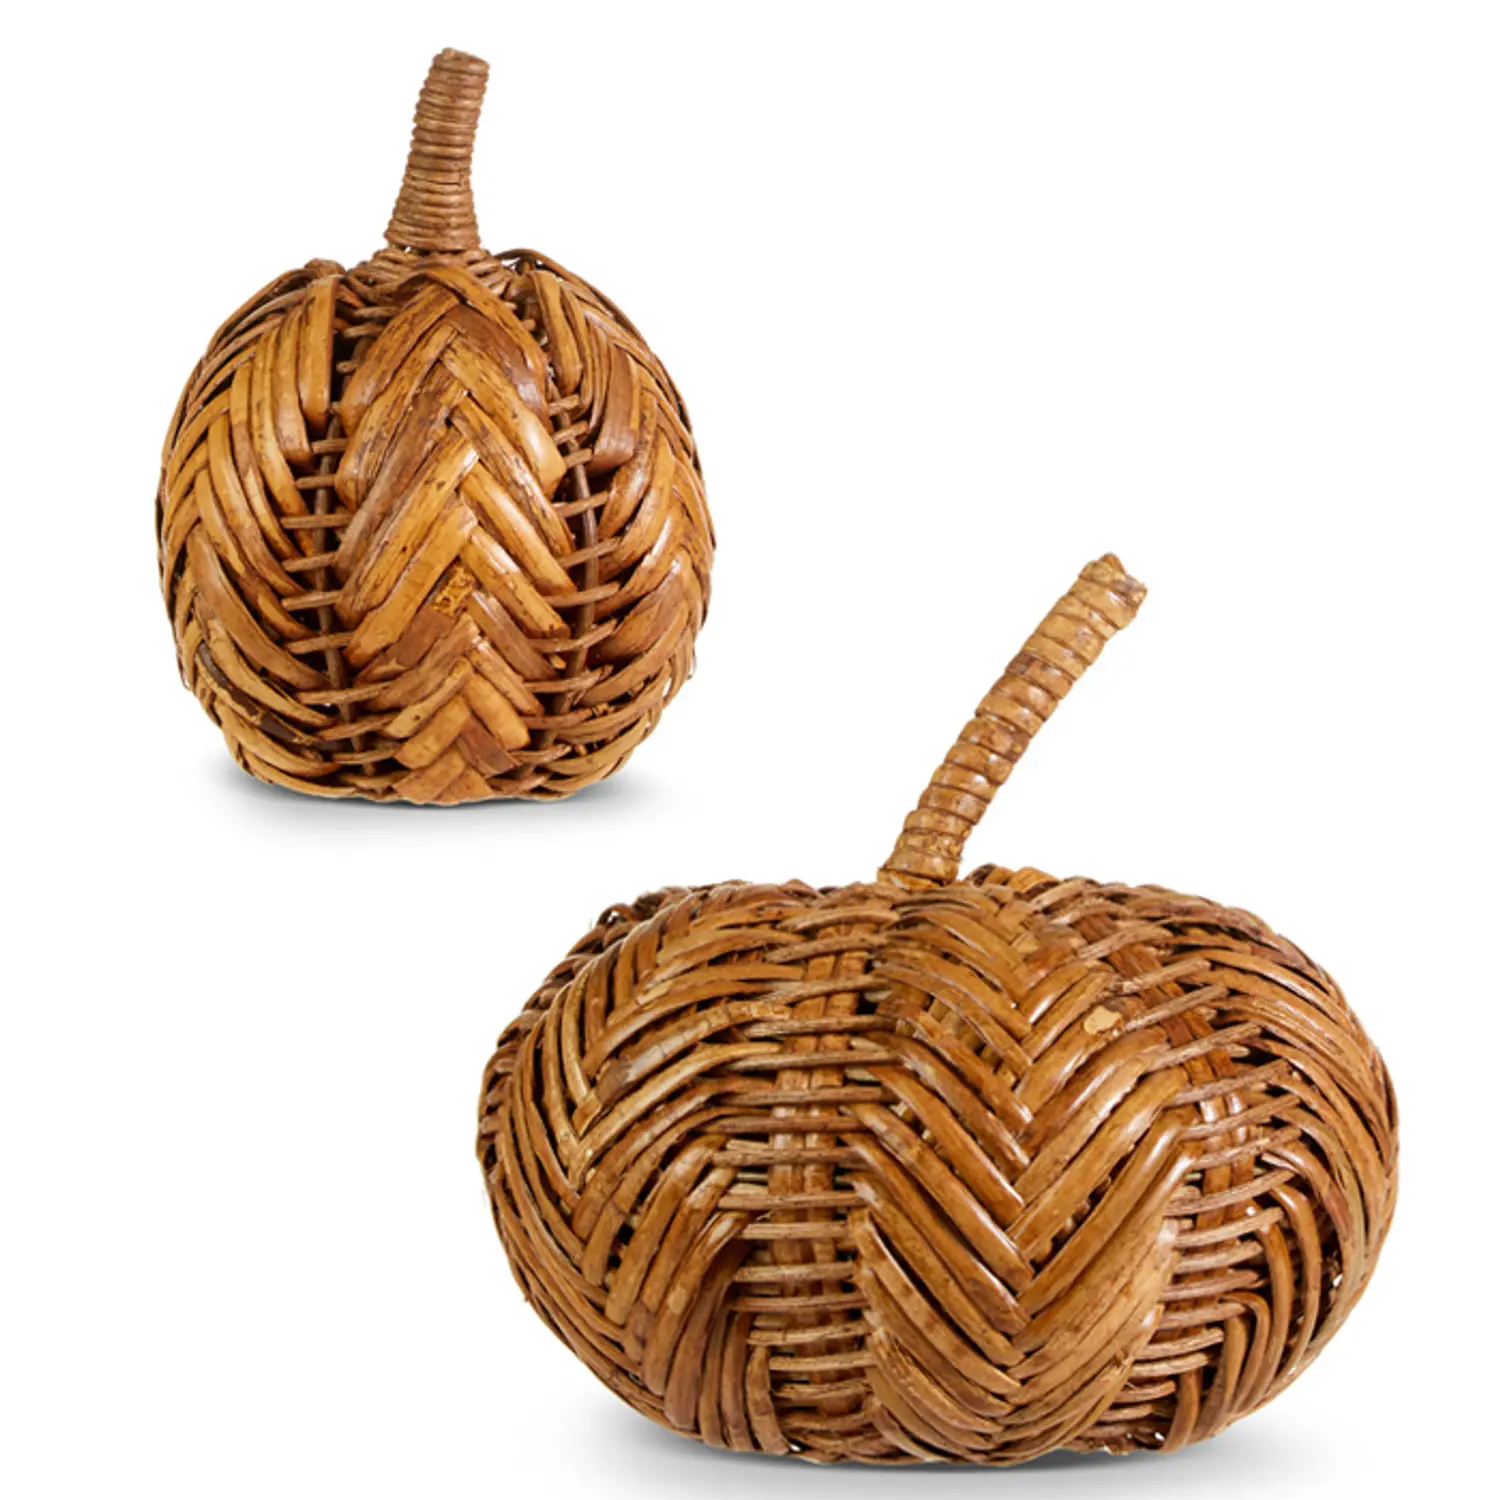 Decorative rattan pumpkins for halloween decoration and gifts natural wicker pumpkin best selling holiday items